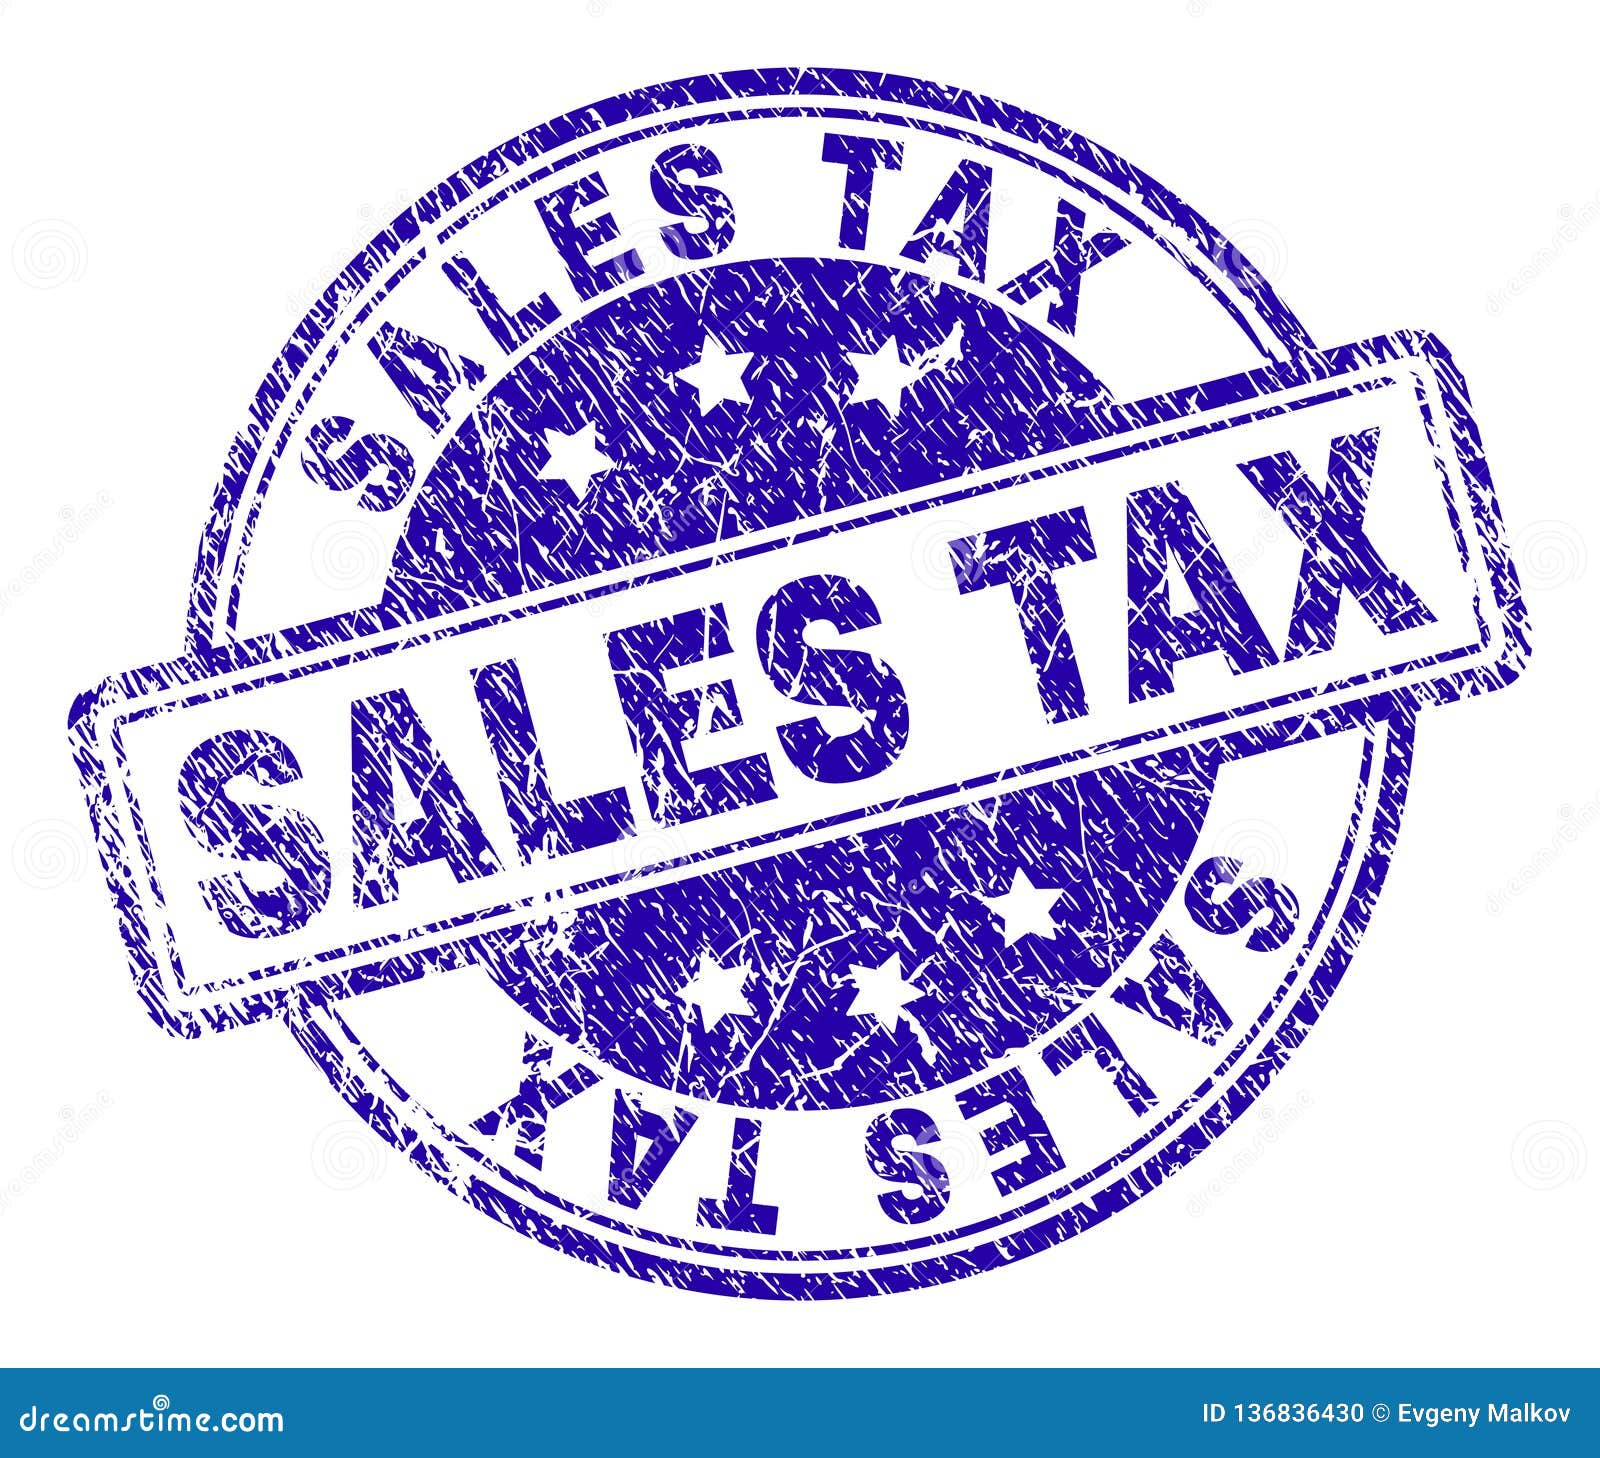 Set of 5 45inx30in Decal Sticker Multiple Sizes Impuestos Income Tax Blue red Business Business Tax Return Outdoor Store Sign Red 